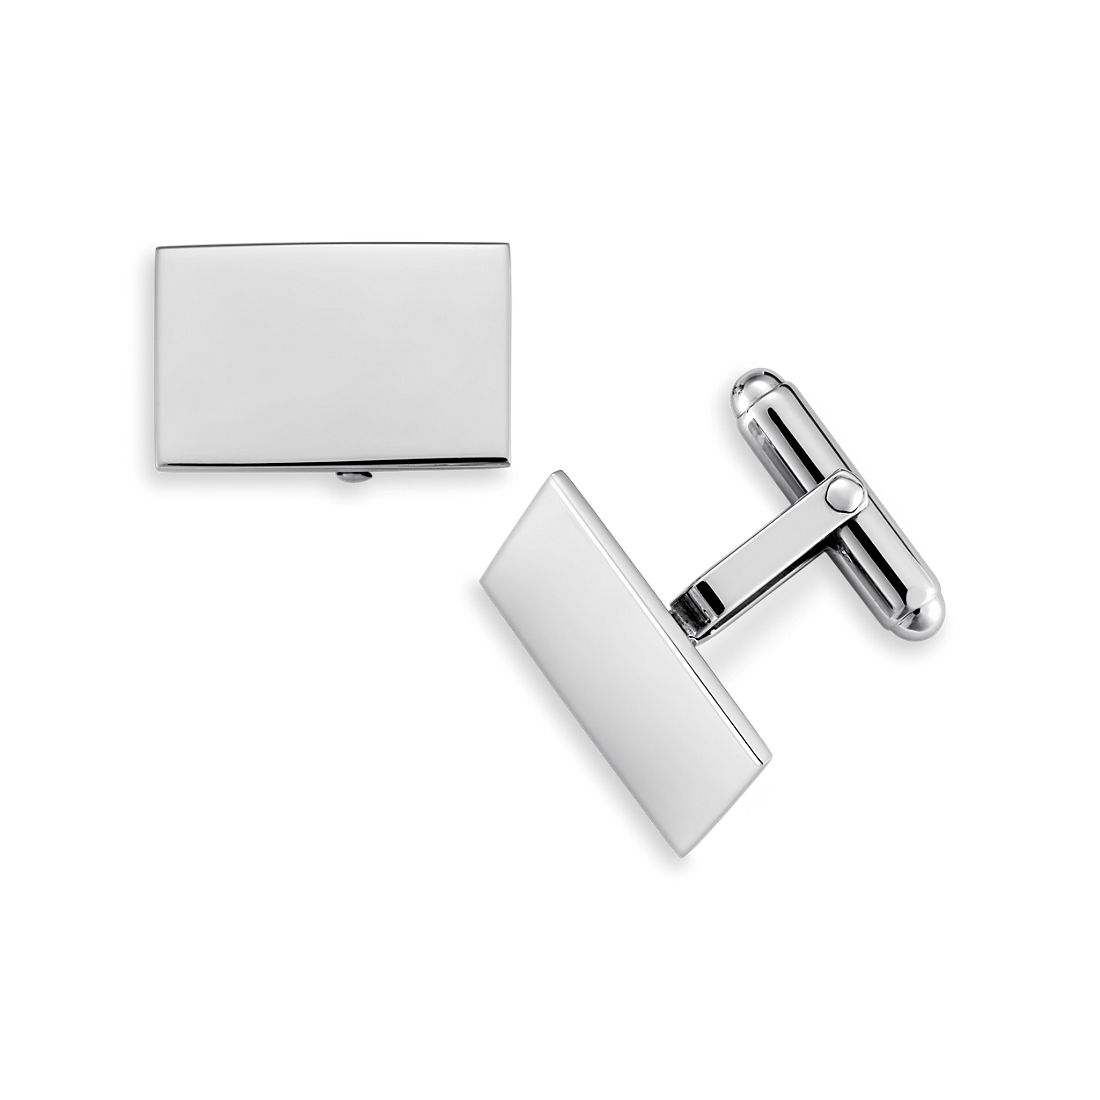 Select Gifts Antique Telephone Sterling Silver Cufflinks Optional Engraved Box 